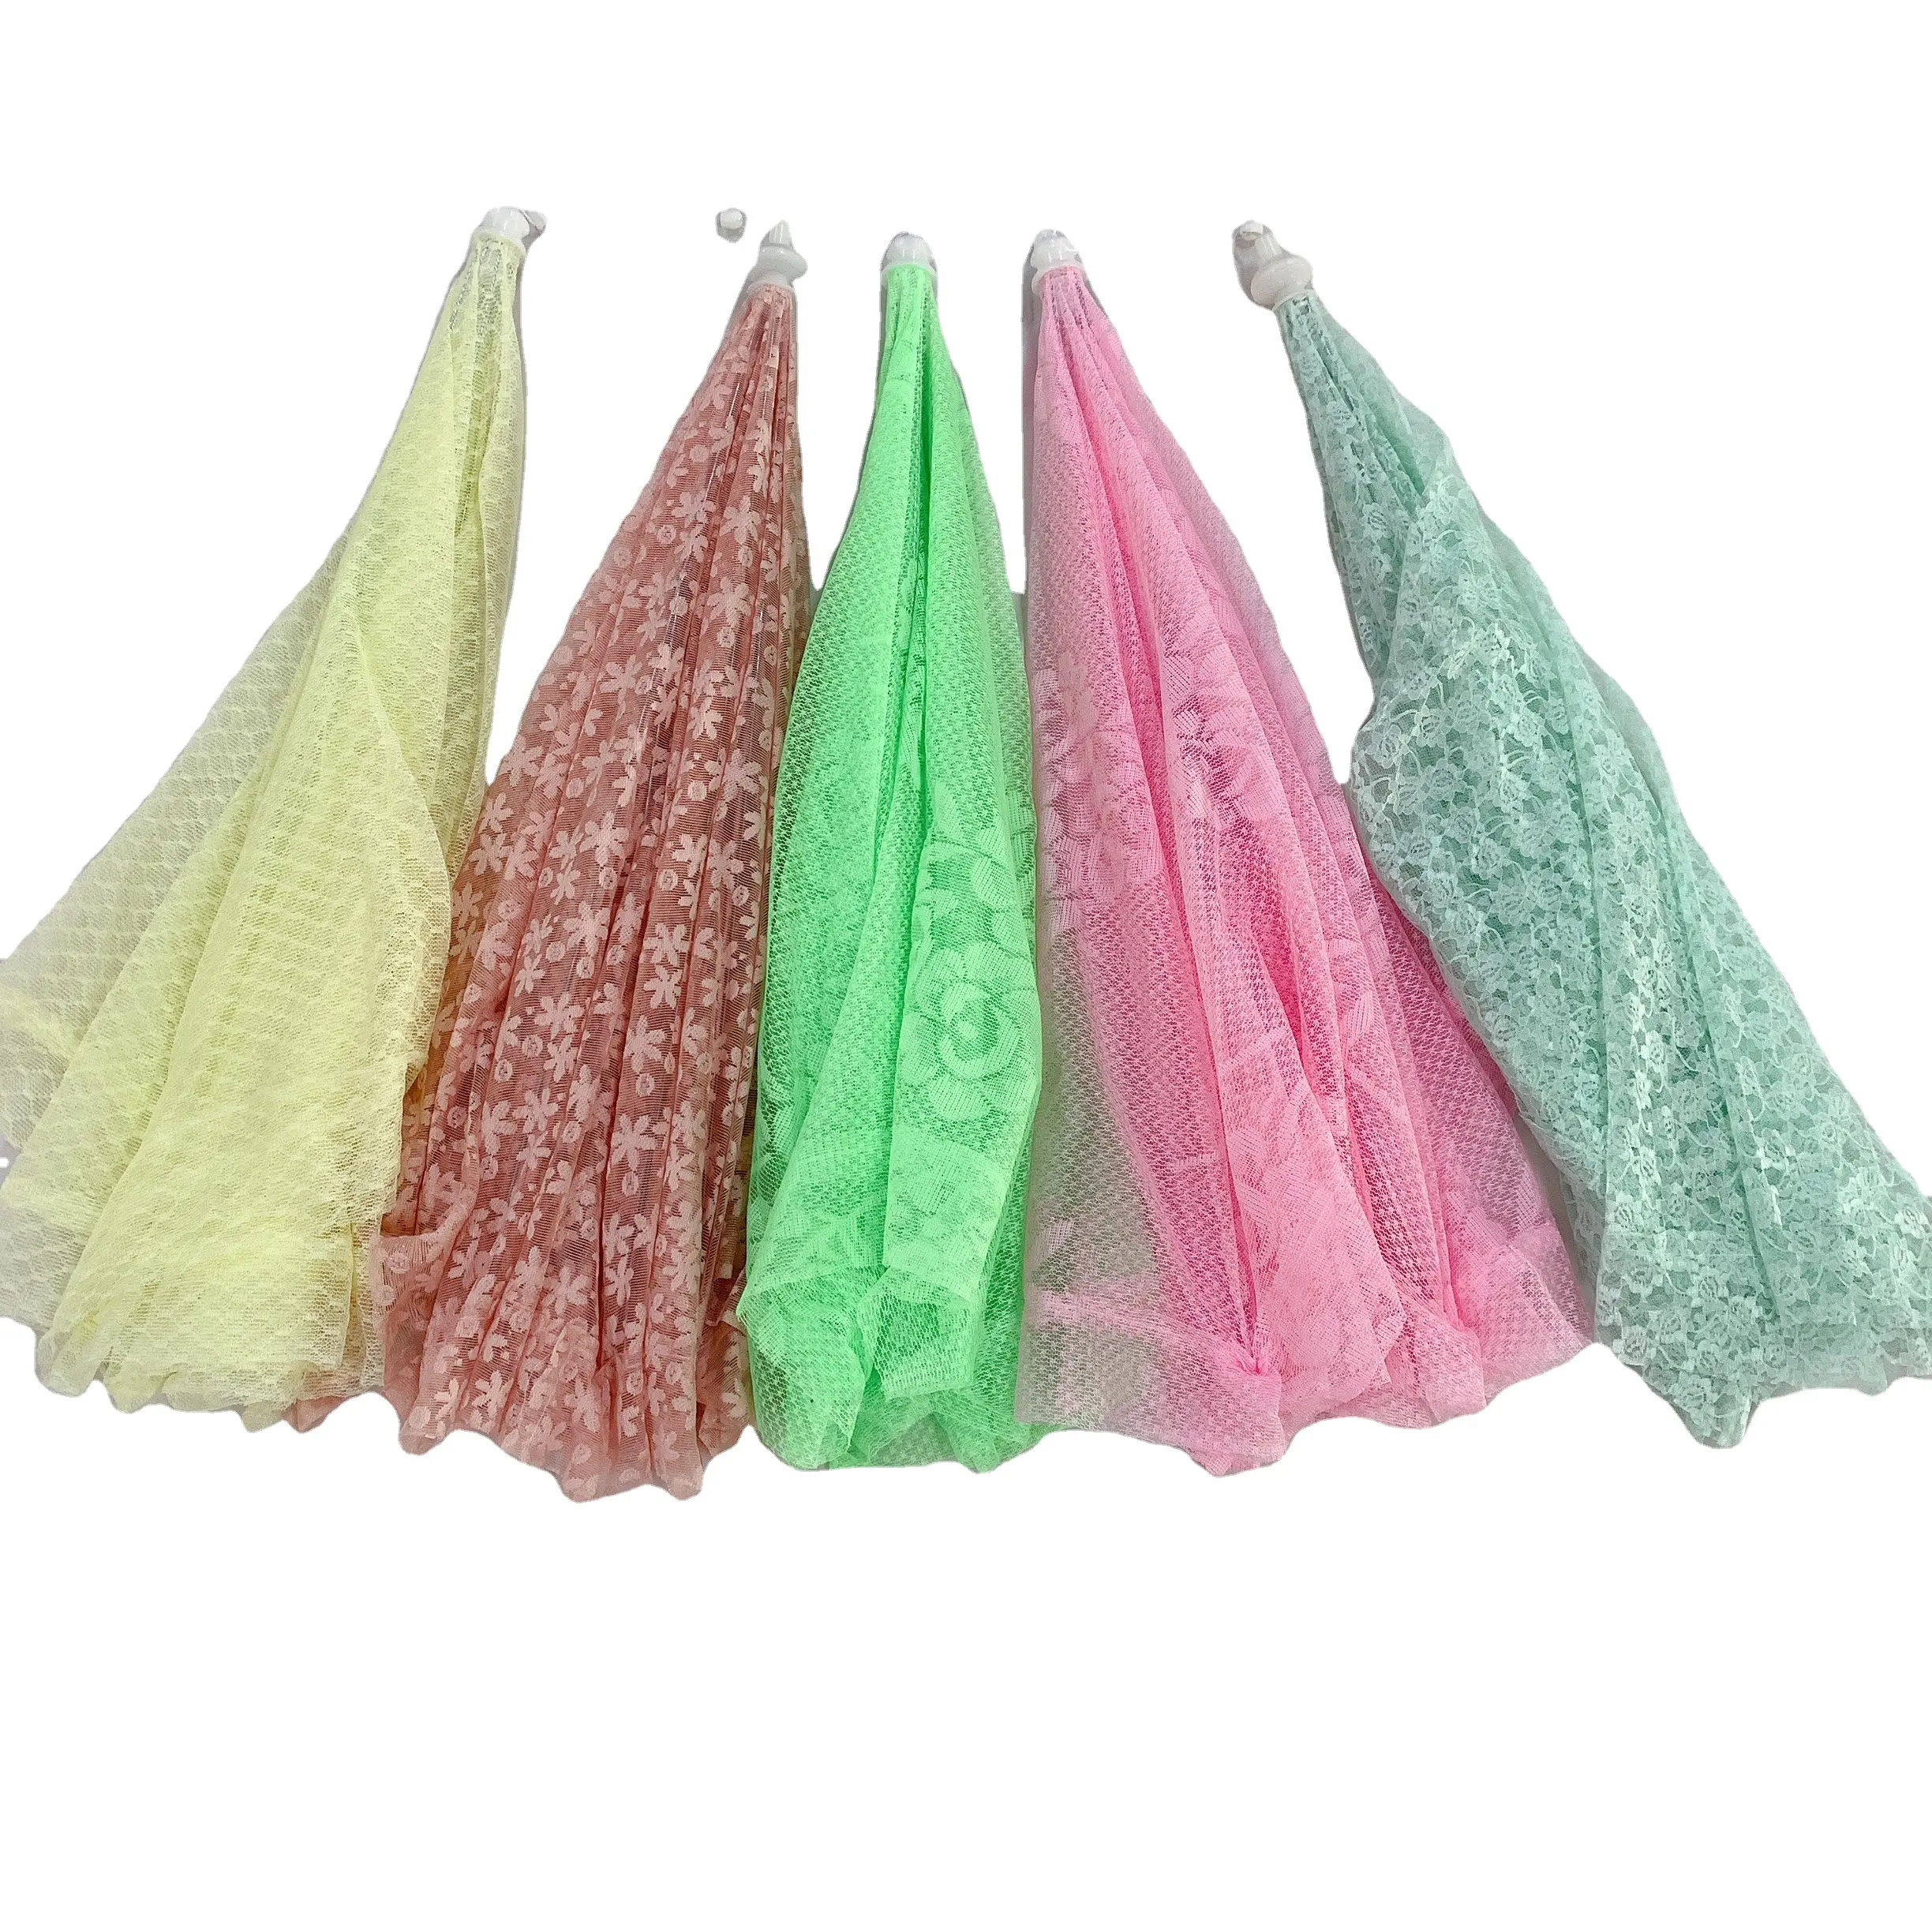 Easy carrying Luxury Home customized flower designs Baby Bed Mosquito umbrella net Mesh Top Fabric Cotton Eco Material Folded